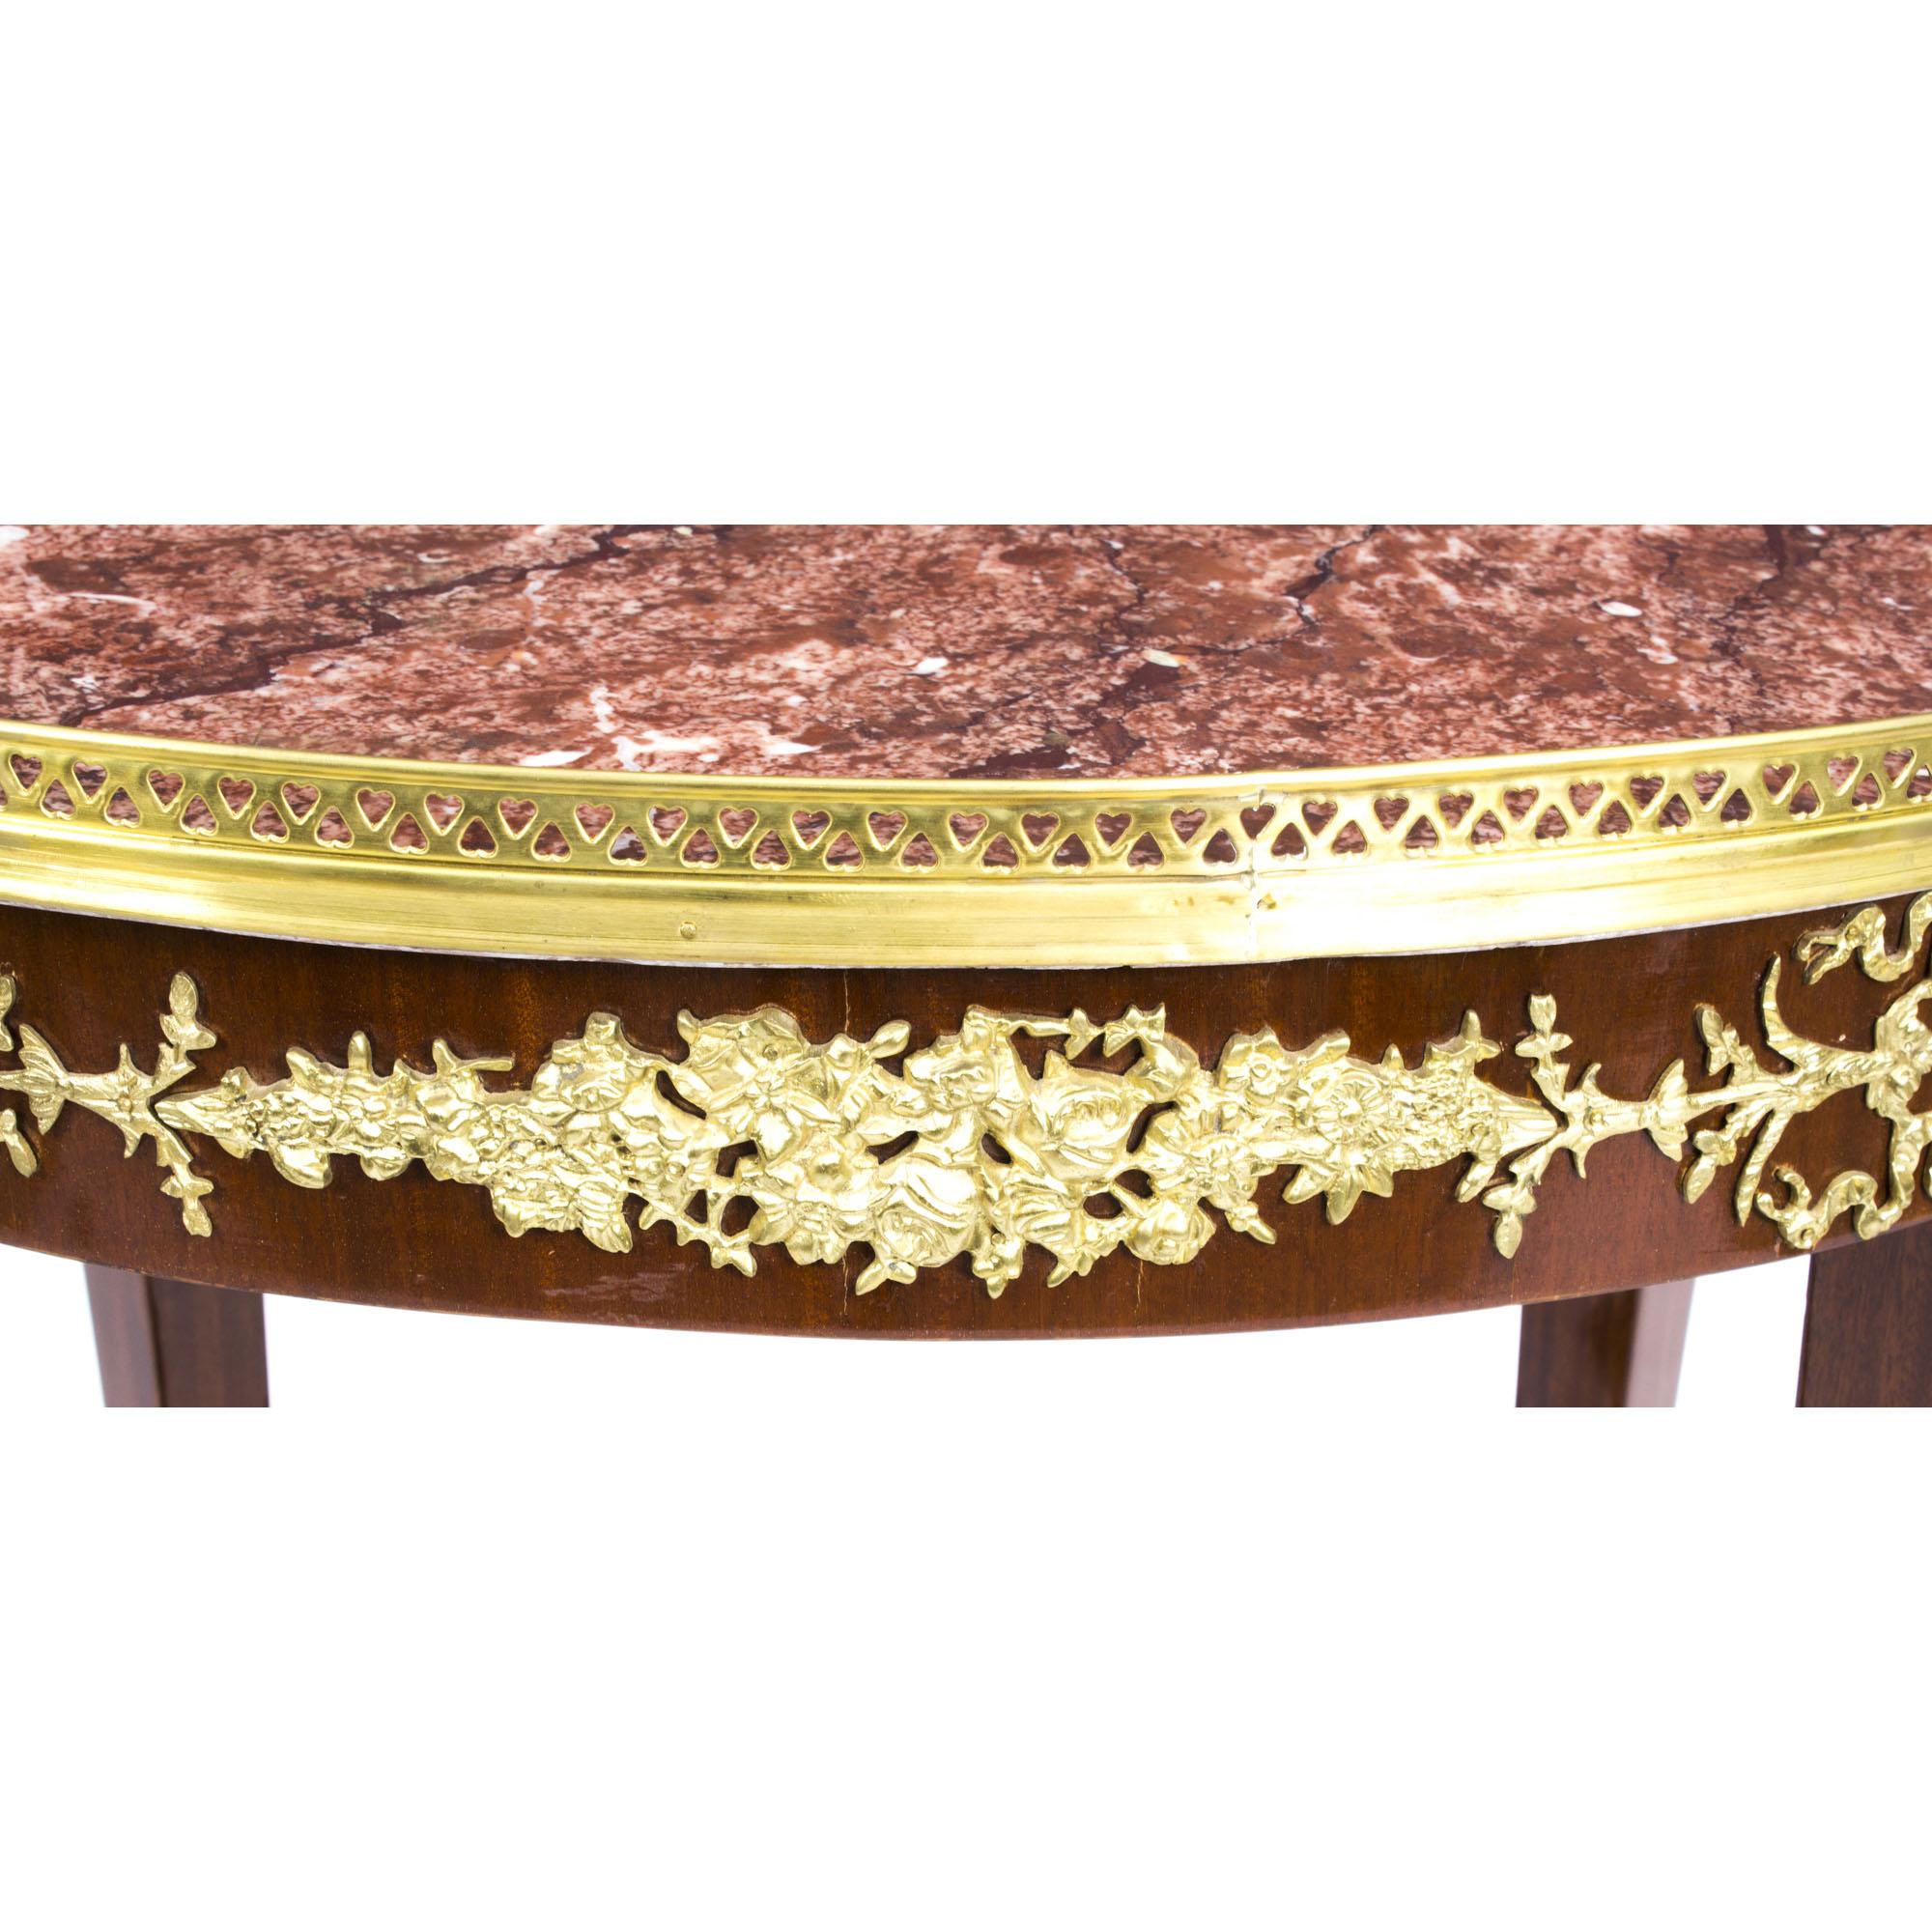 Vintage Empire Revival Marble Top Ormolu Mounted Occasional Table 20th C For Sale 2